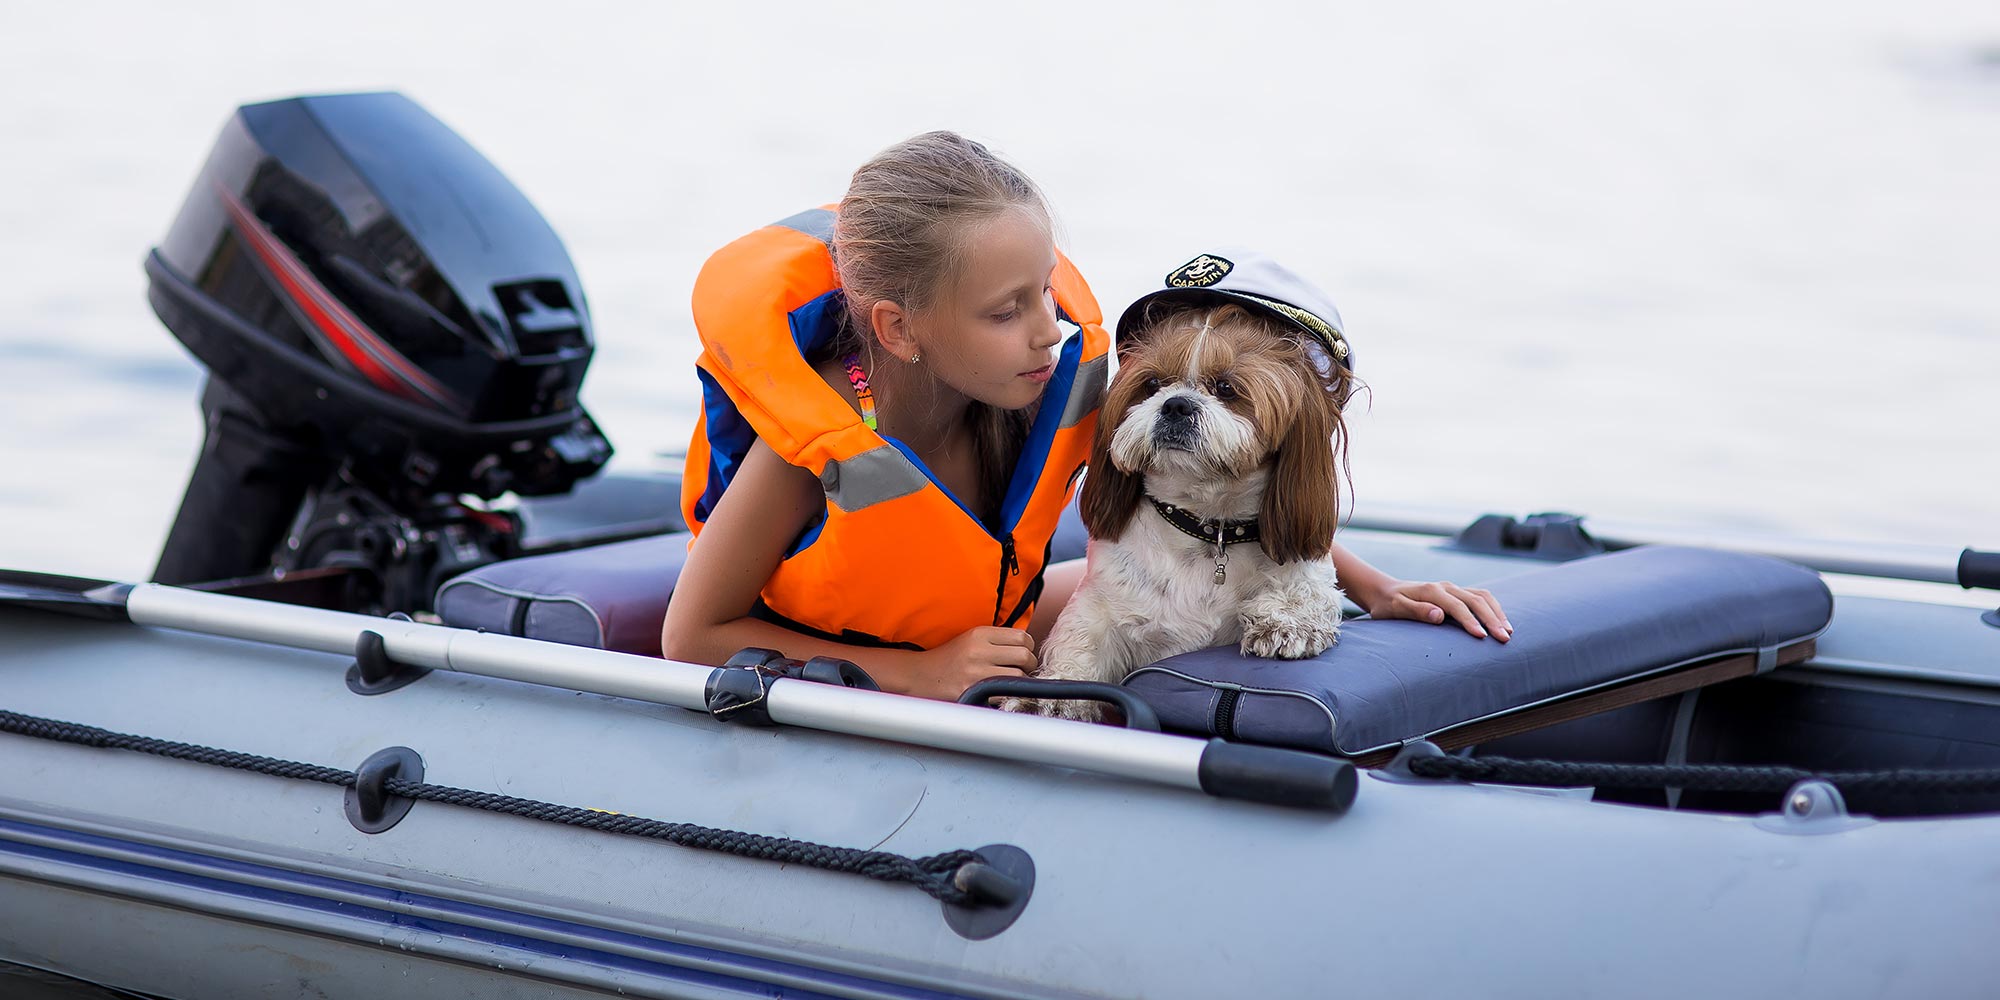 10 Of The Most Fun Boat Accessories 2023 - You Must Have On Board!